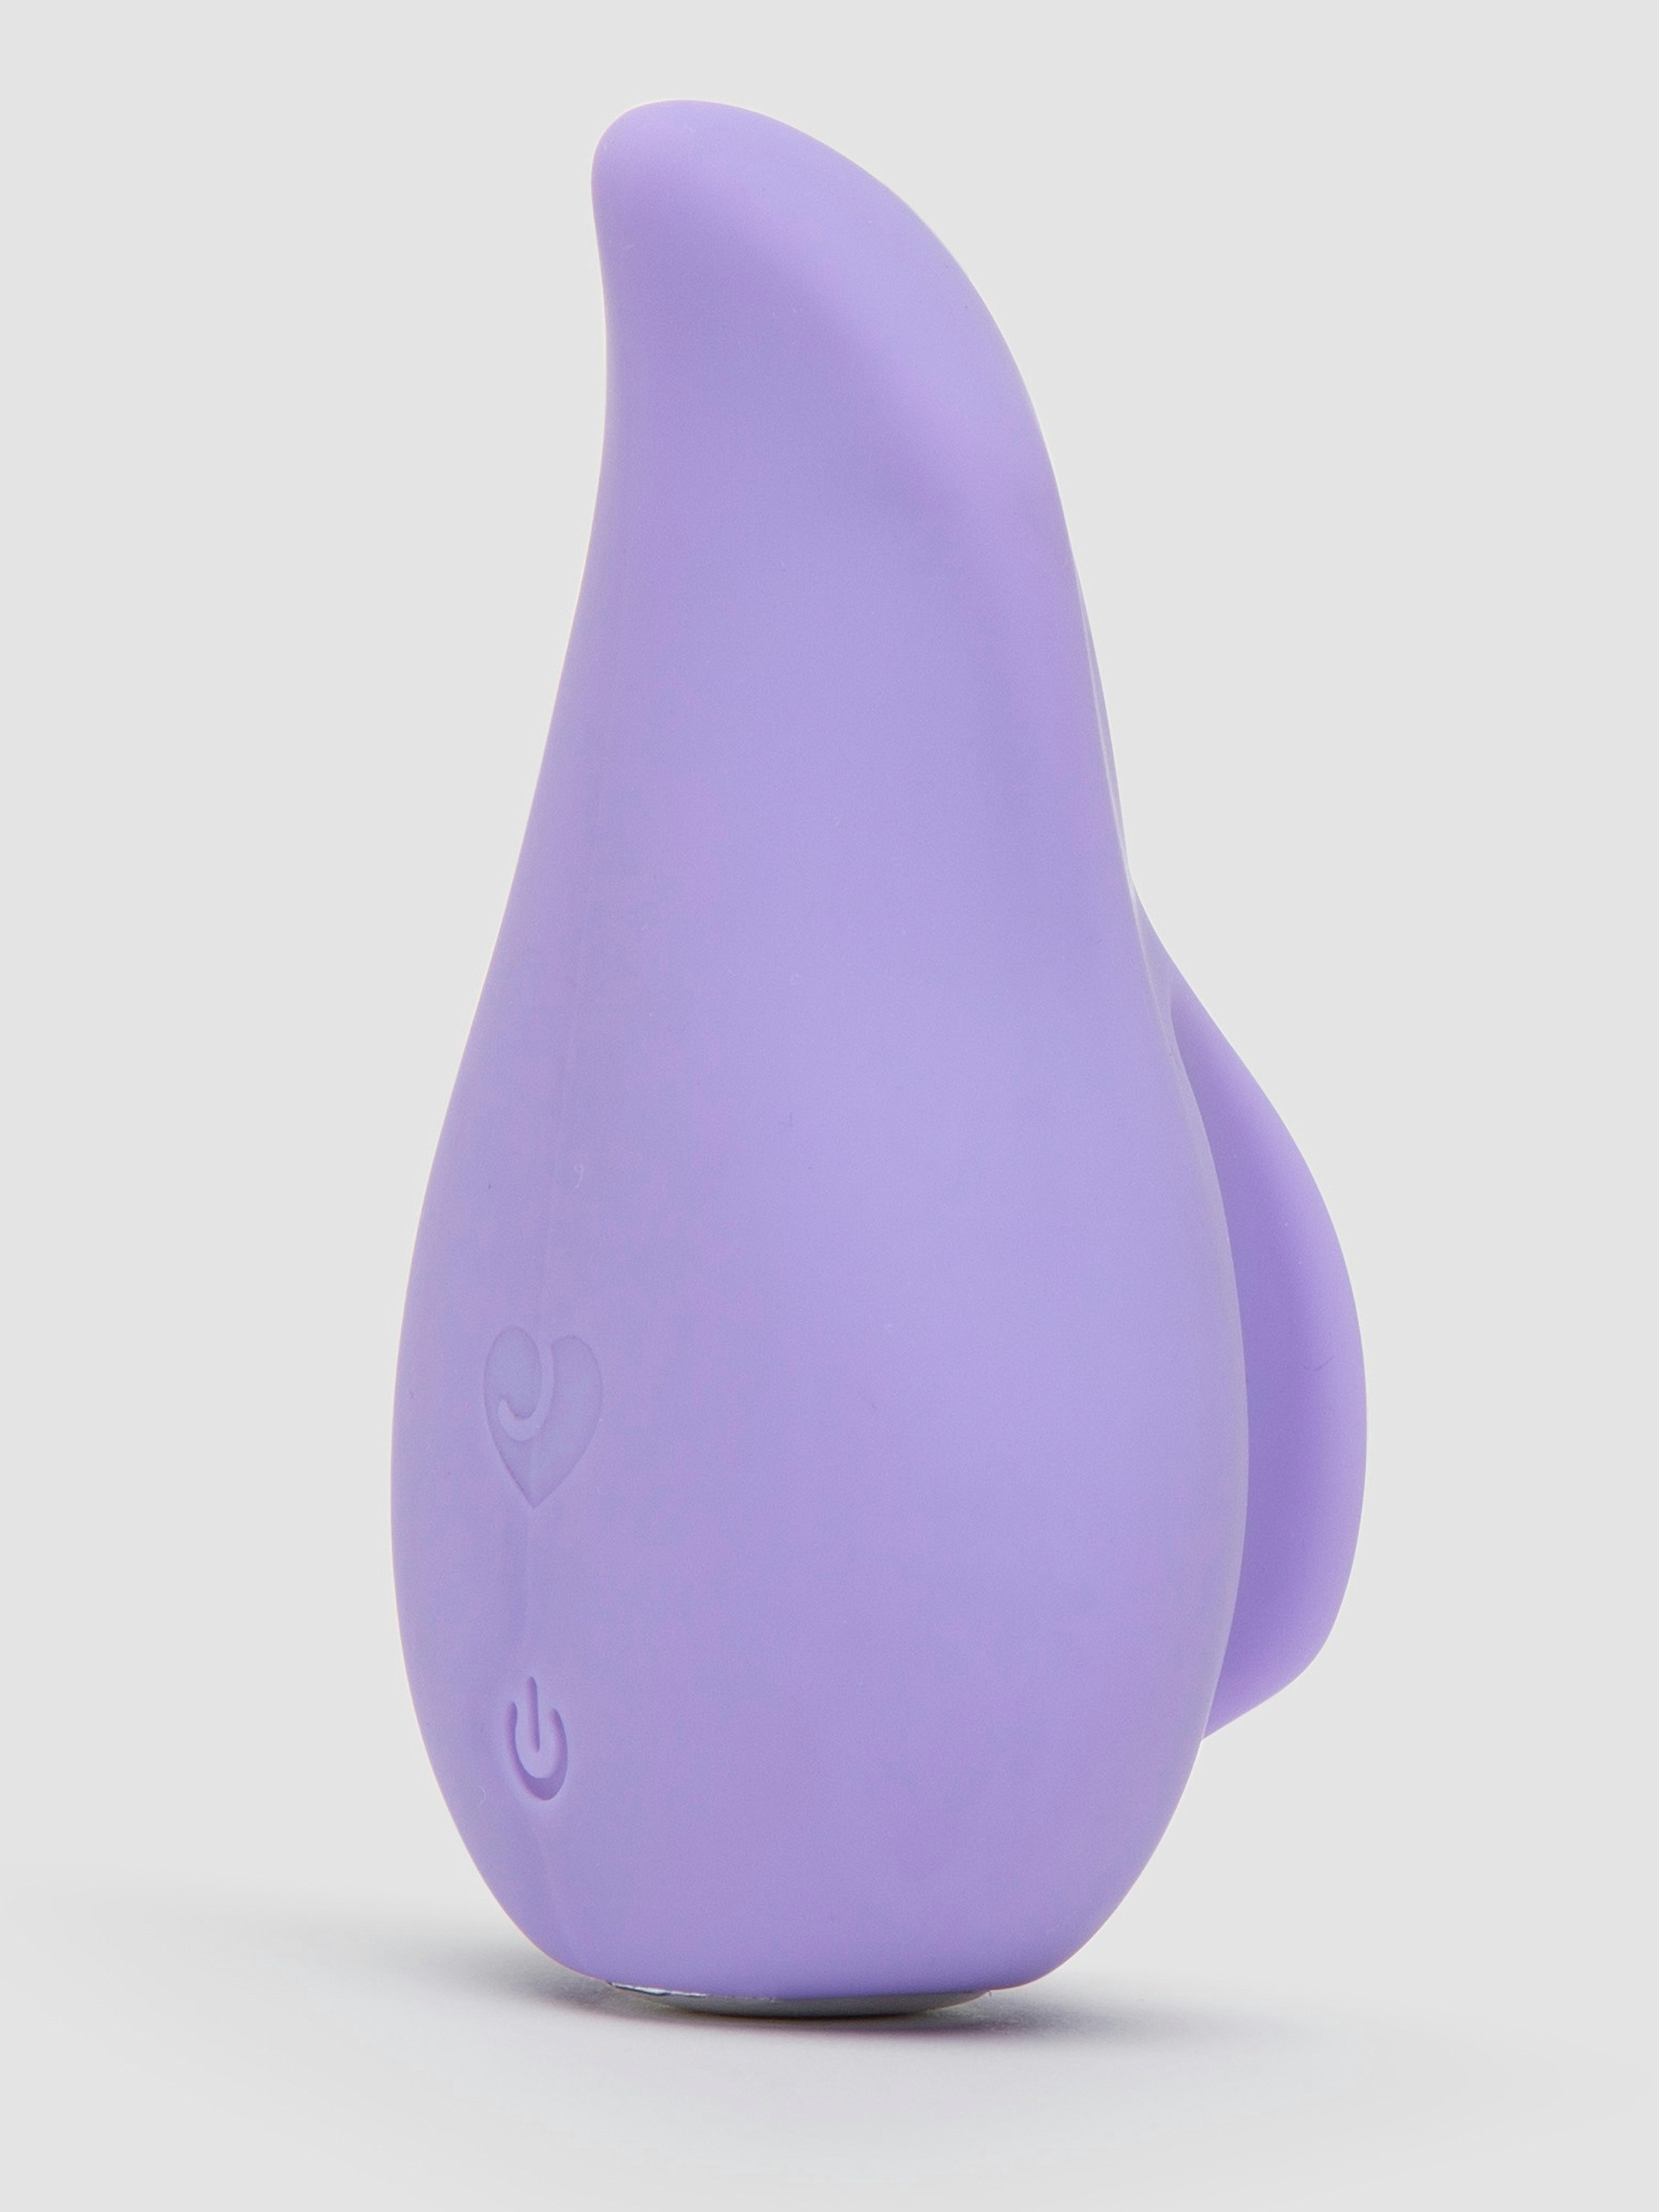 Lovehoney Luxury 12 Function Rechargeable Silicone Clitoral Vibrator - Purple